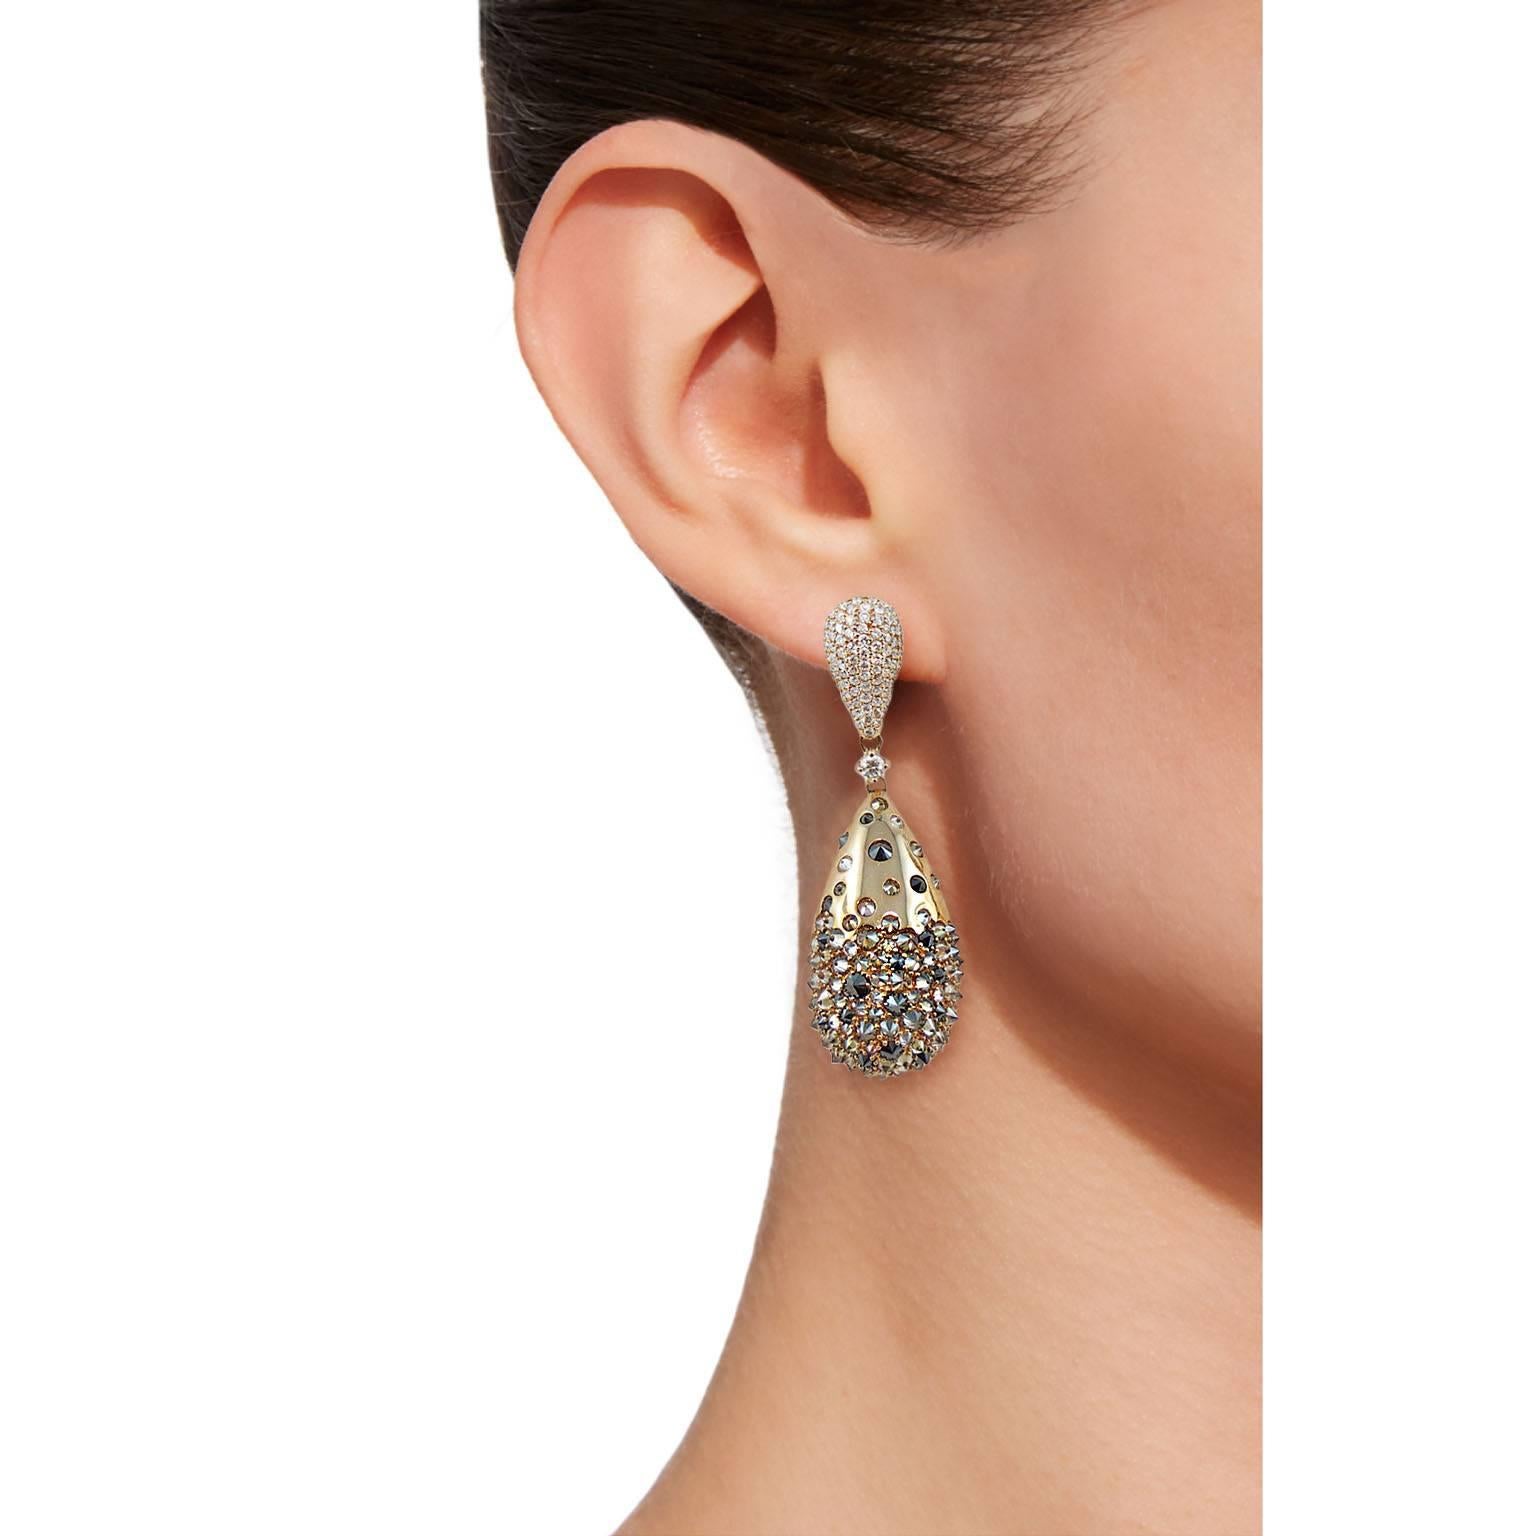 One pair of drop ear clip pendants by Jona. The earrings feature 4.28 carats of black diamonds, 1.21 carats of brown diamonds and 1.83 carats of white diamonds, F Color, VVS1 Clarity. Hand crafted in Italy, signed Jona.
All Jona jewelry is new and